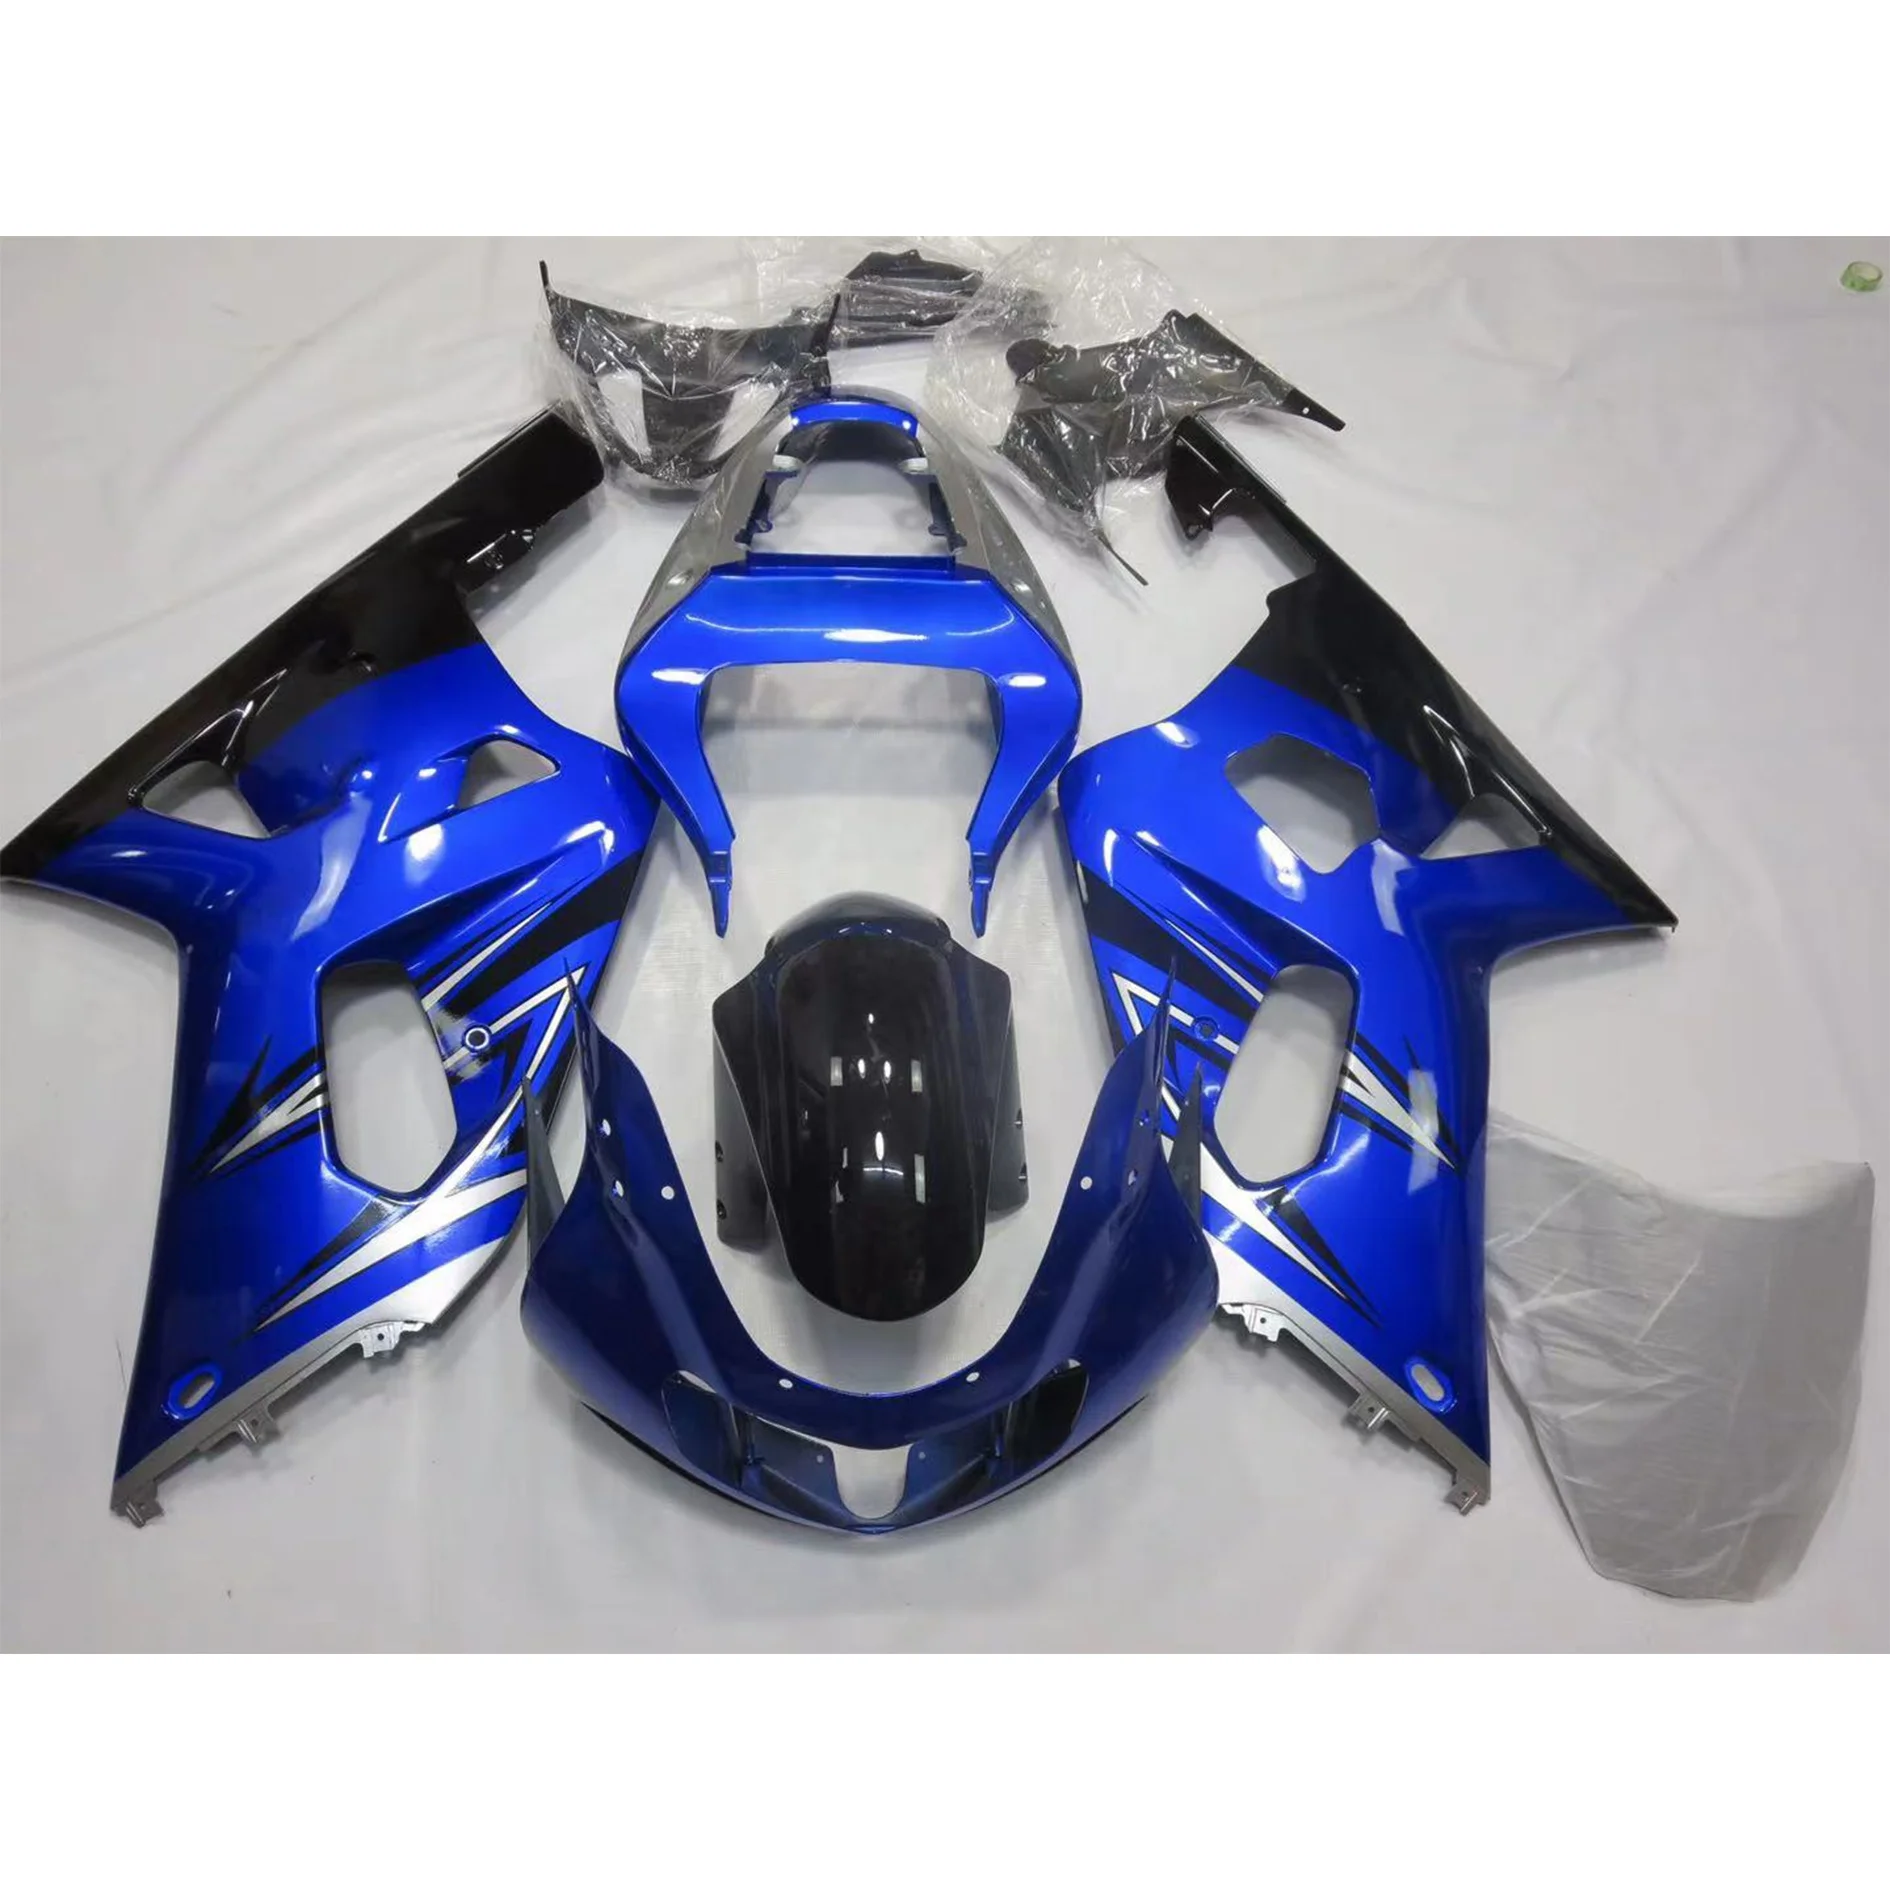 

2022 WHSC Blue And Black OEM Motorcycle Accessories For SUZUKI GSXR600-750 2001-2003 Custom Cover Body ABS Plastic Fairings Kit, Pictures shown